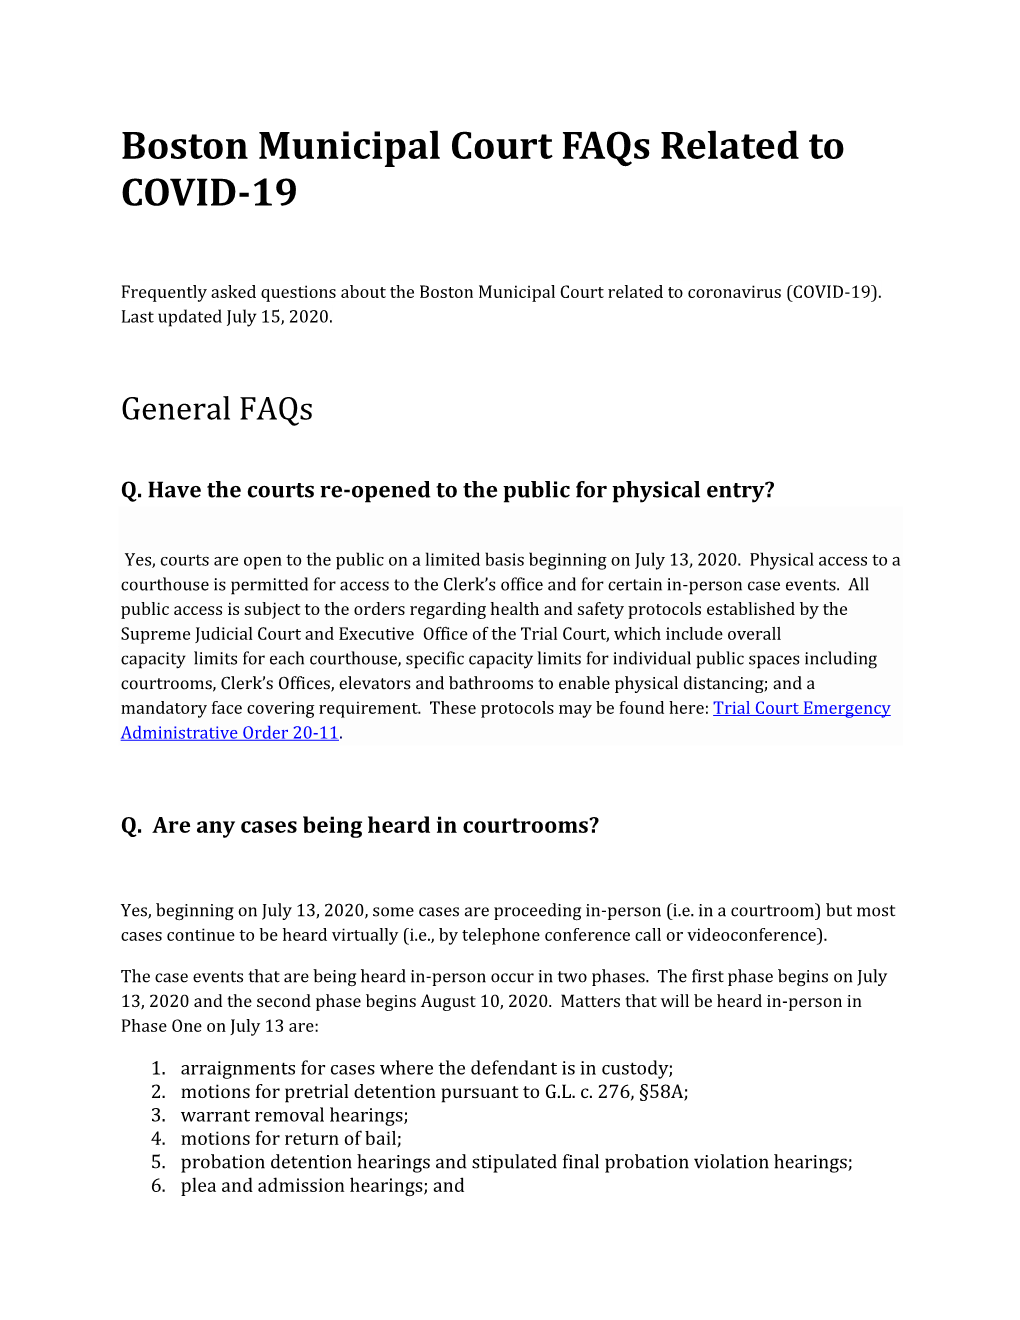 Boston Municipal Court Faqs Related to COVID-19